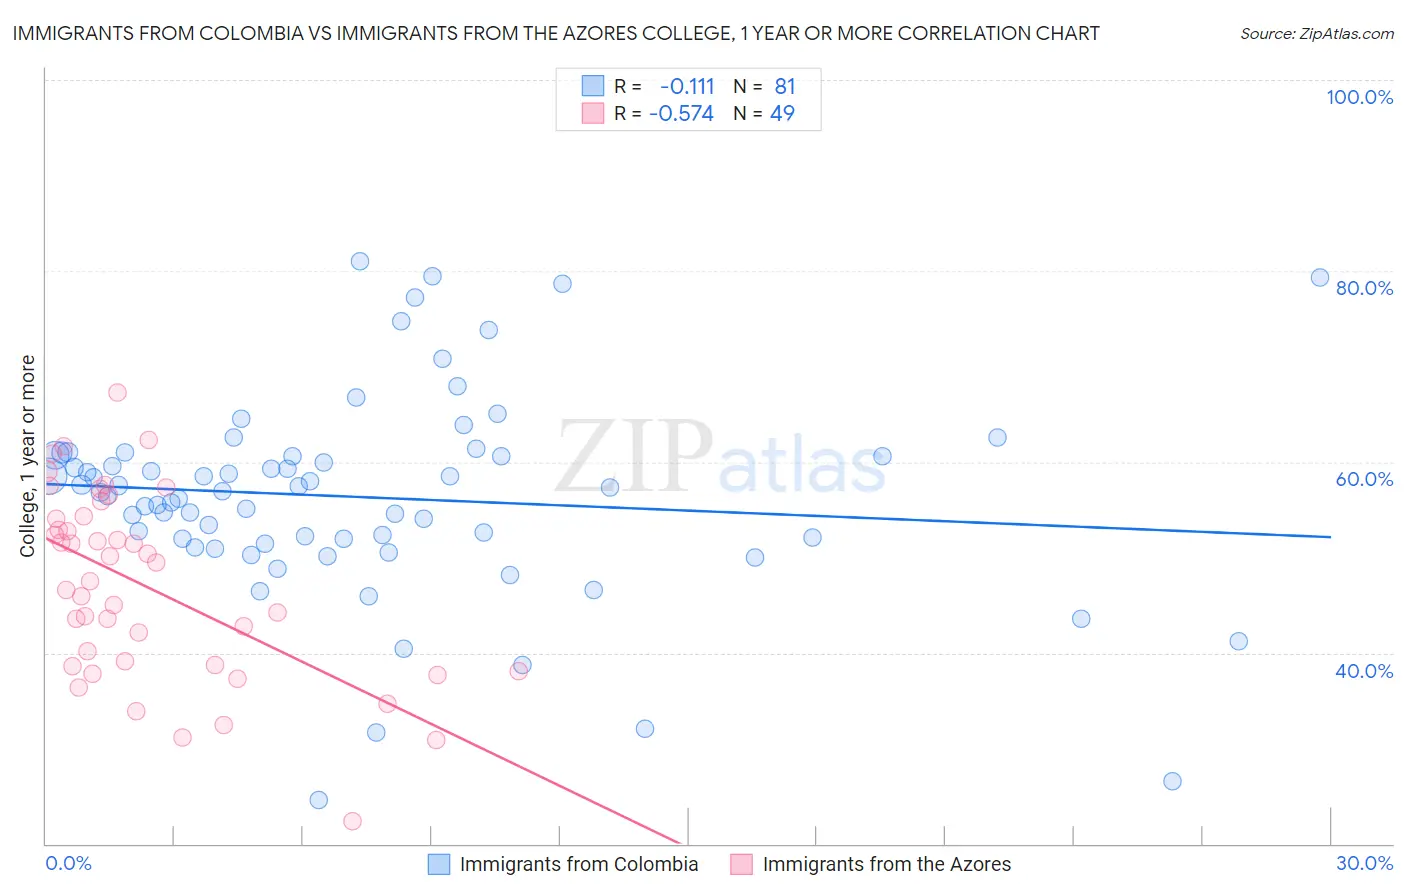 Immigrants from Colombia vs Immigrants from the Azores College, 1 year or more